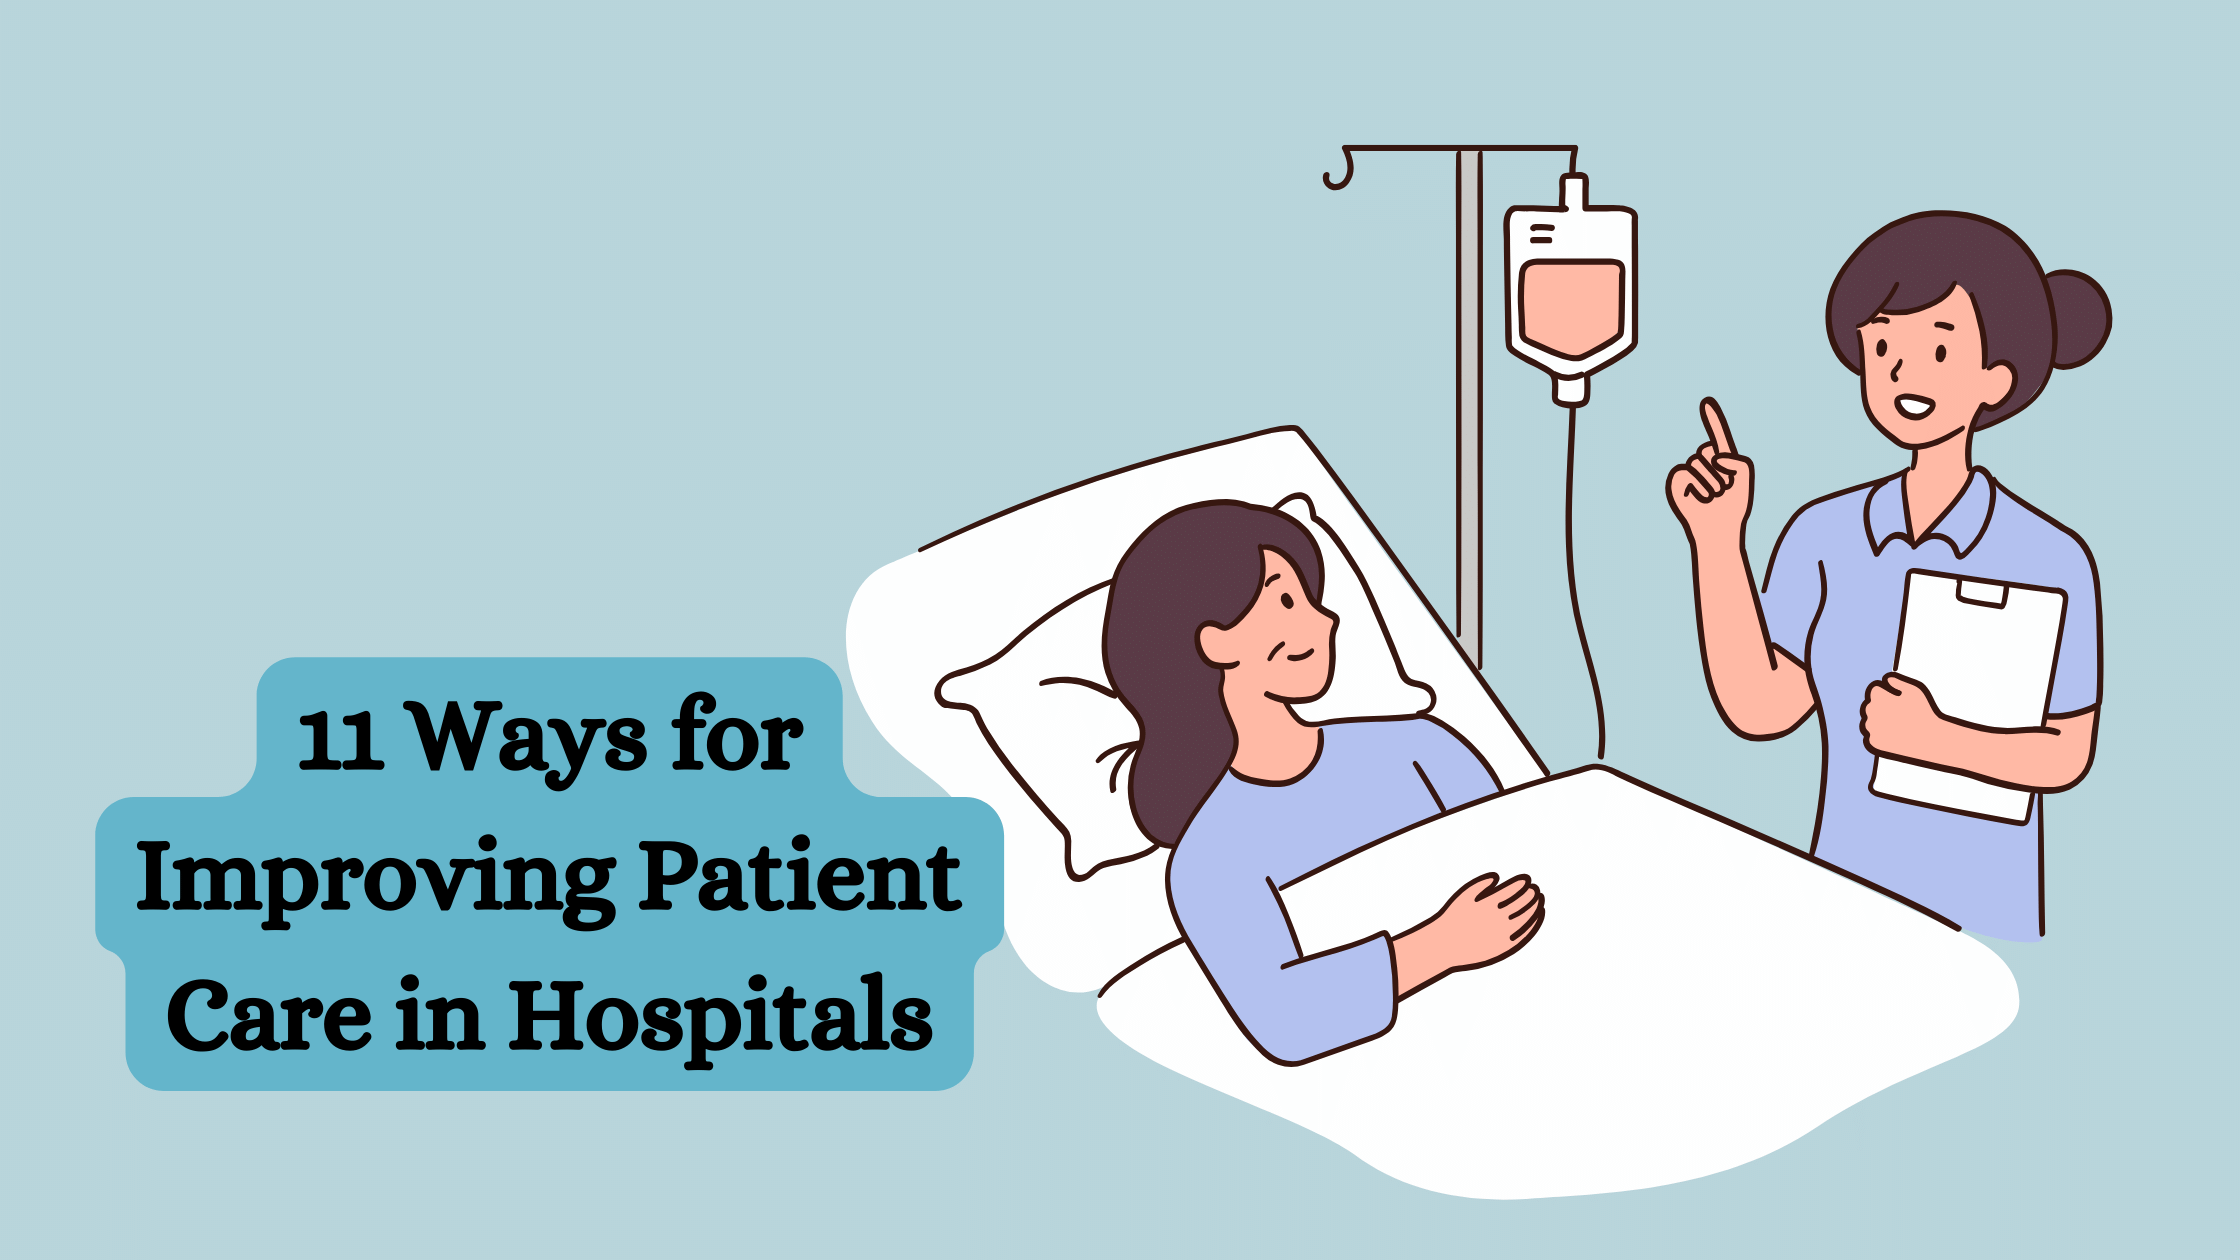 Improving Patient Care in Hospitals